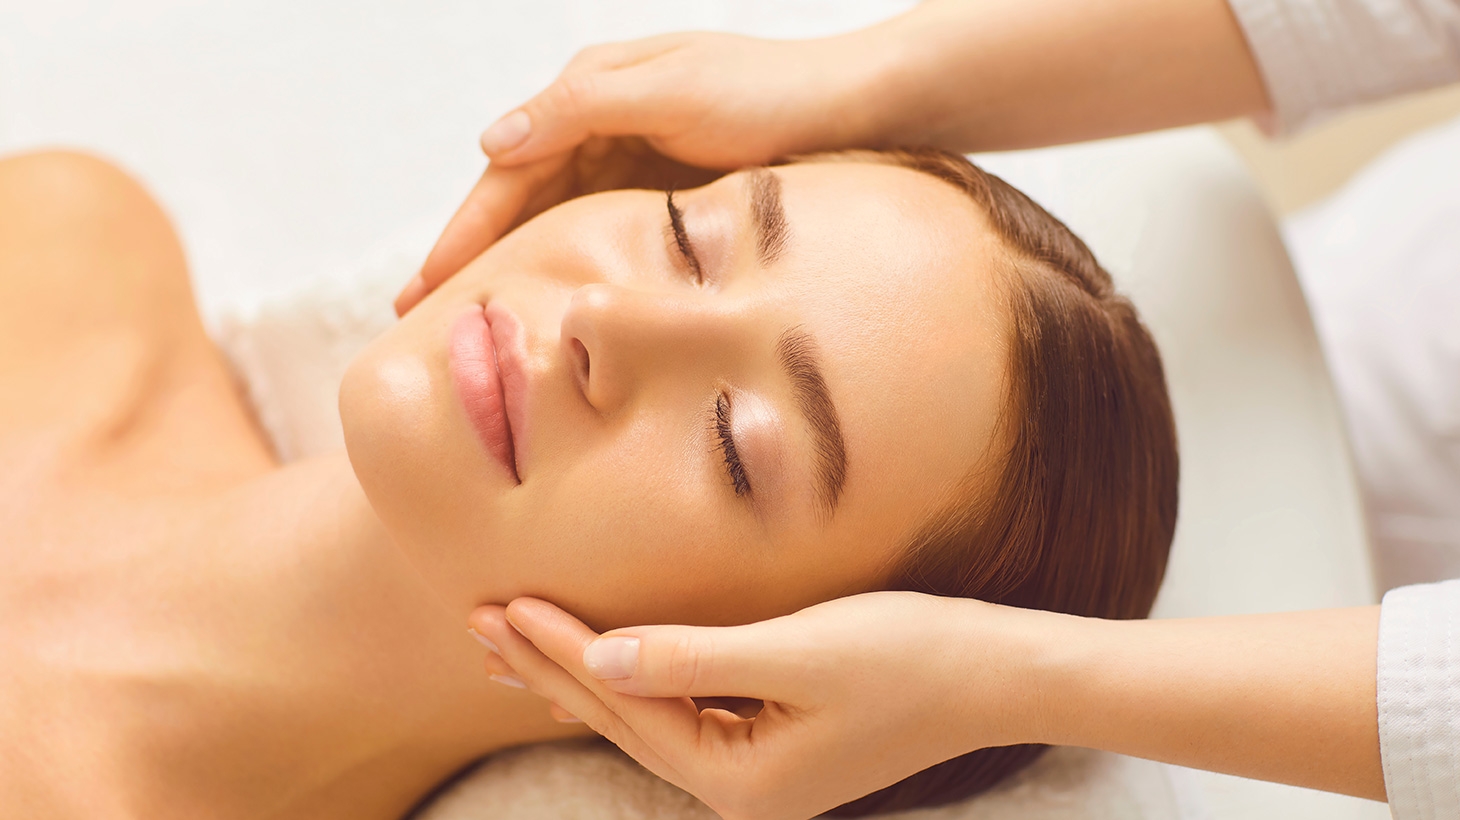 Two Hour Pampering With Facial Foot Spa And More In Newtown From Body